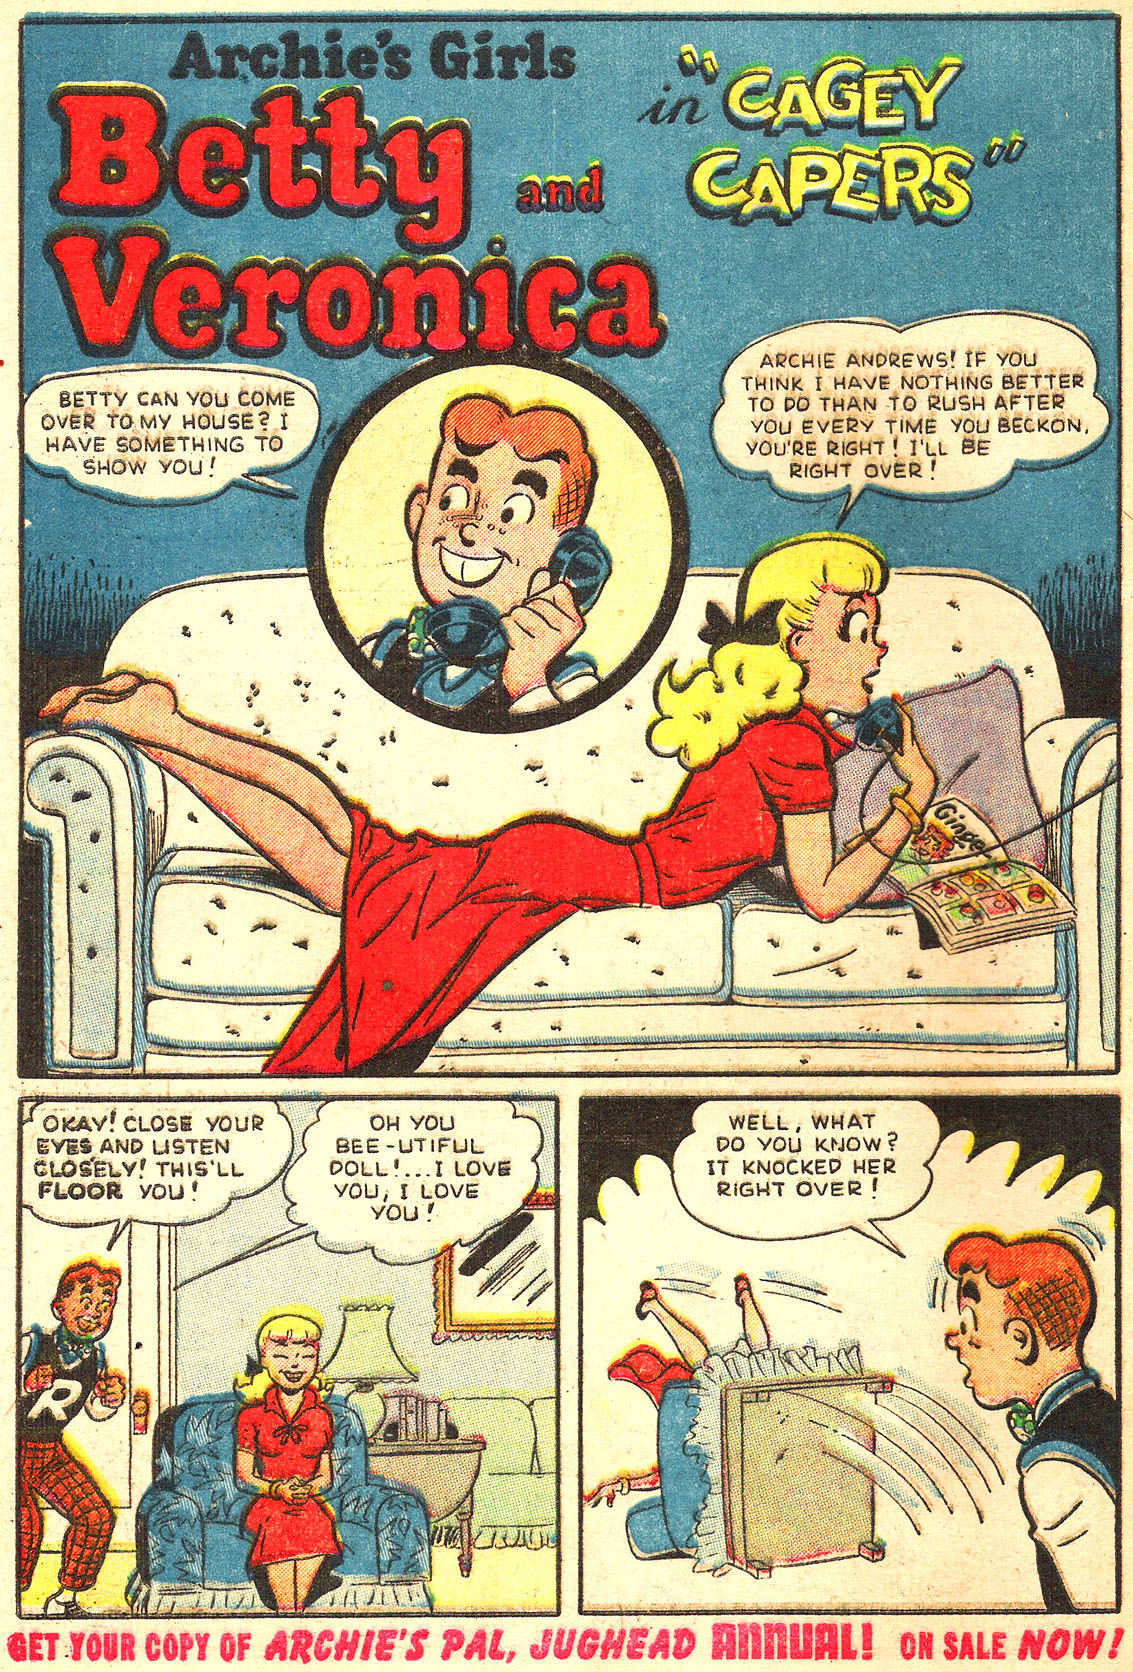 Read online Archie's Girls Betty and Veronica comic -  Issue #Archie's Girls Betty and Veronica Annual 1 - 84